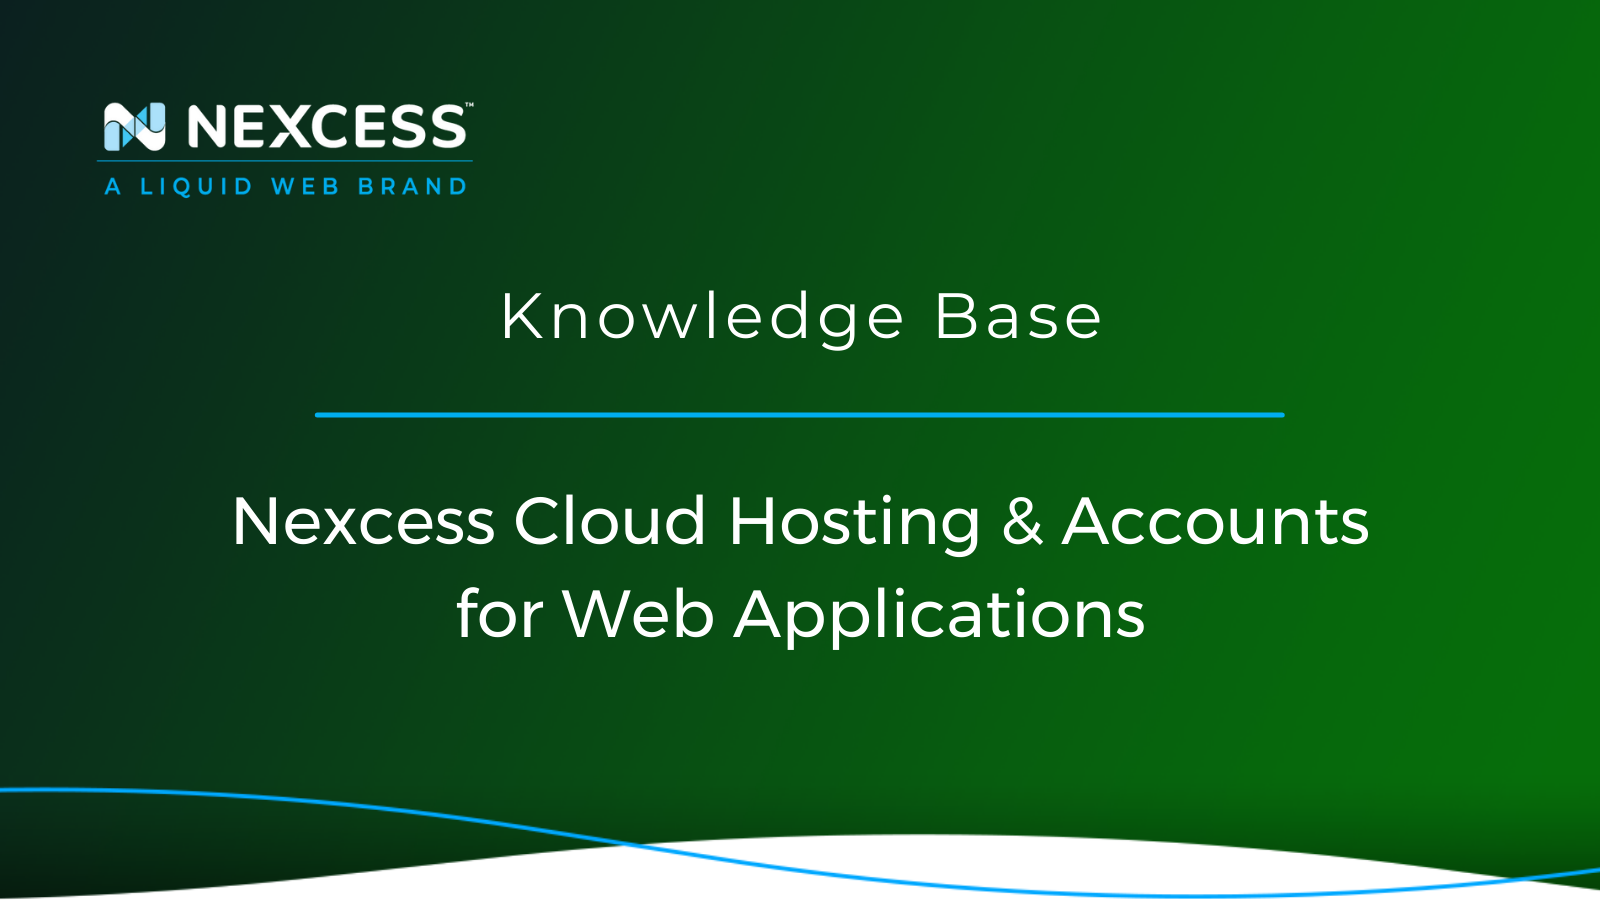 Nexcess Cloud Hosting & Accounts for Web Applications